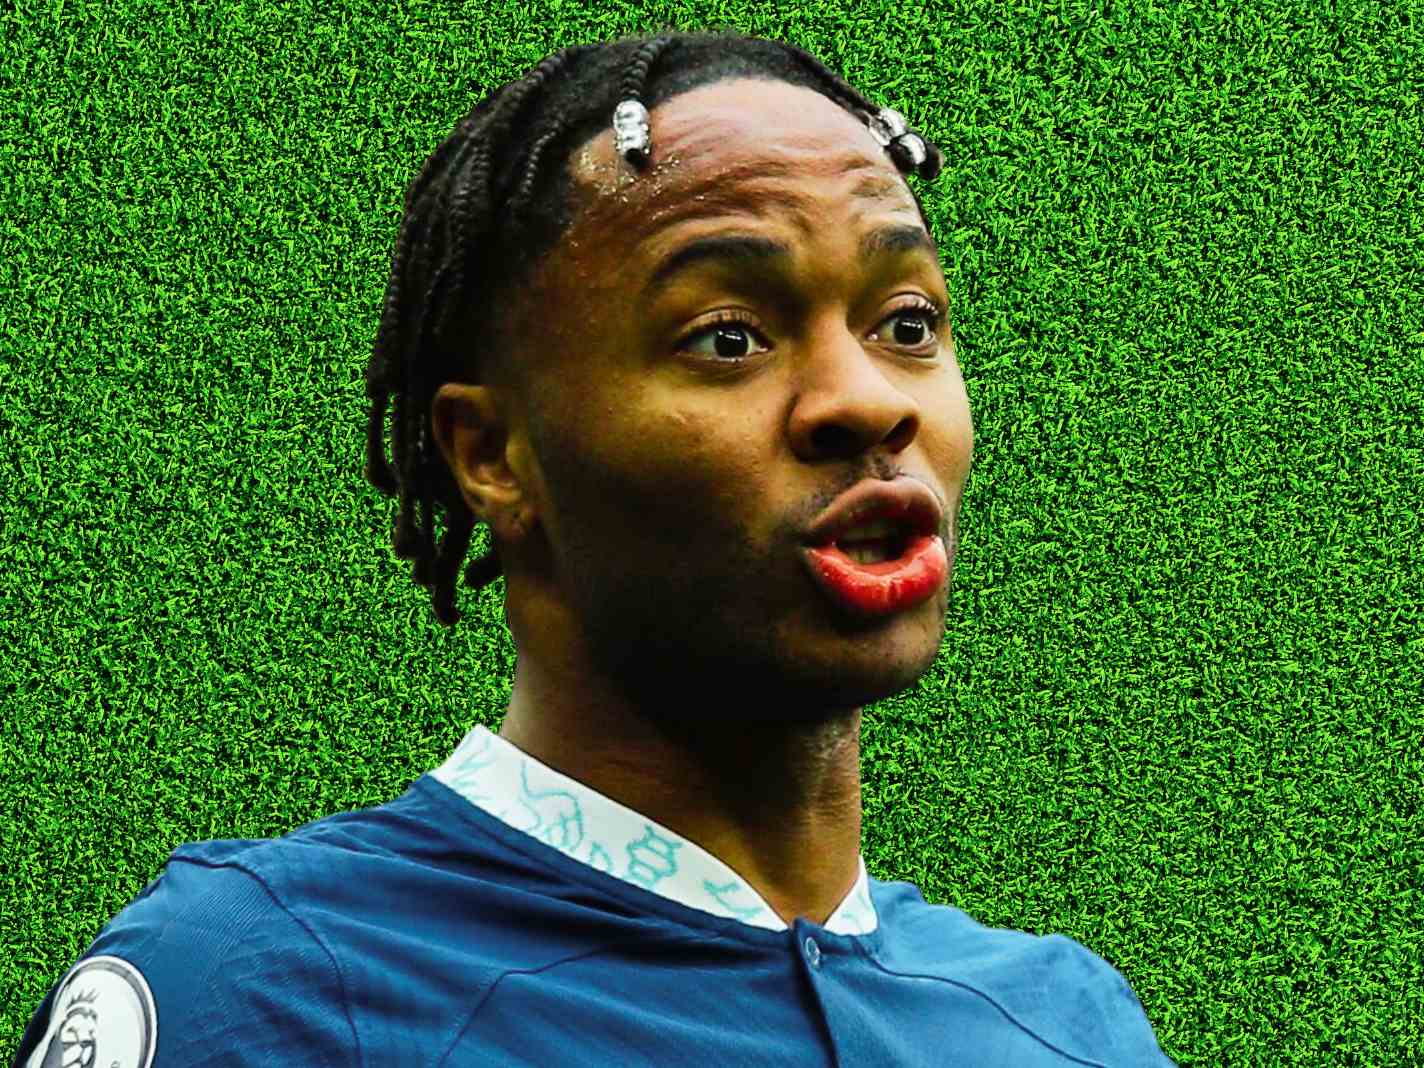 Arsenal vs Chelsea Predictions: Can Raheem Sterling Cause an Upset?